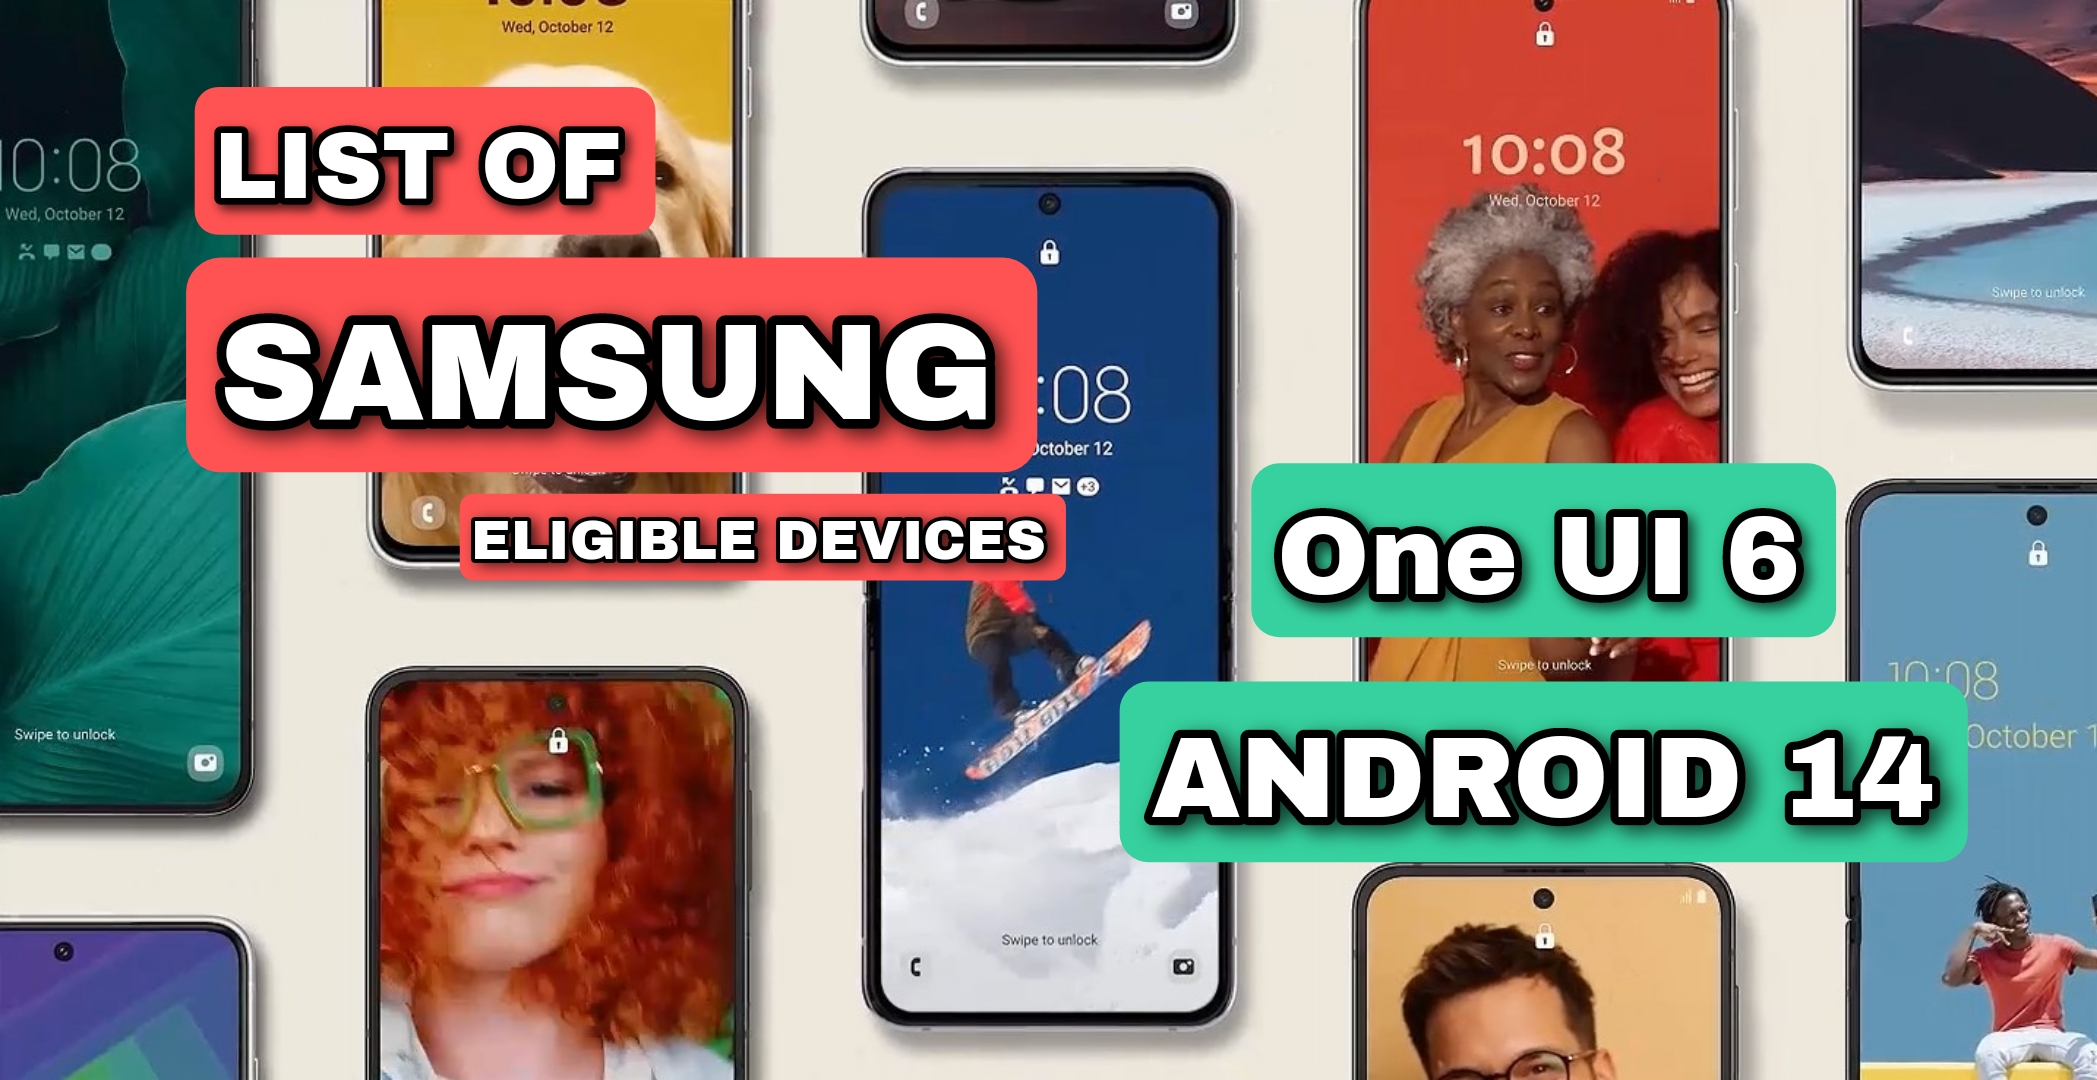 list of samsung smartphones eligible for android 14 - the go android